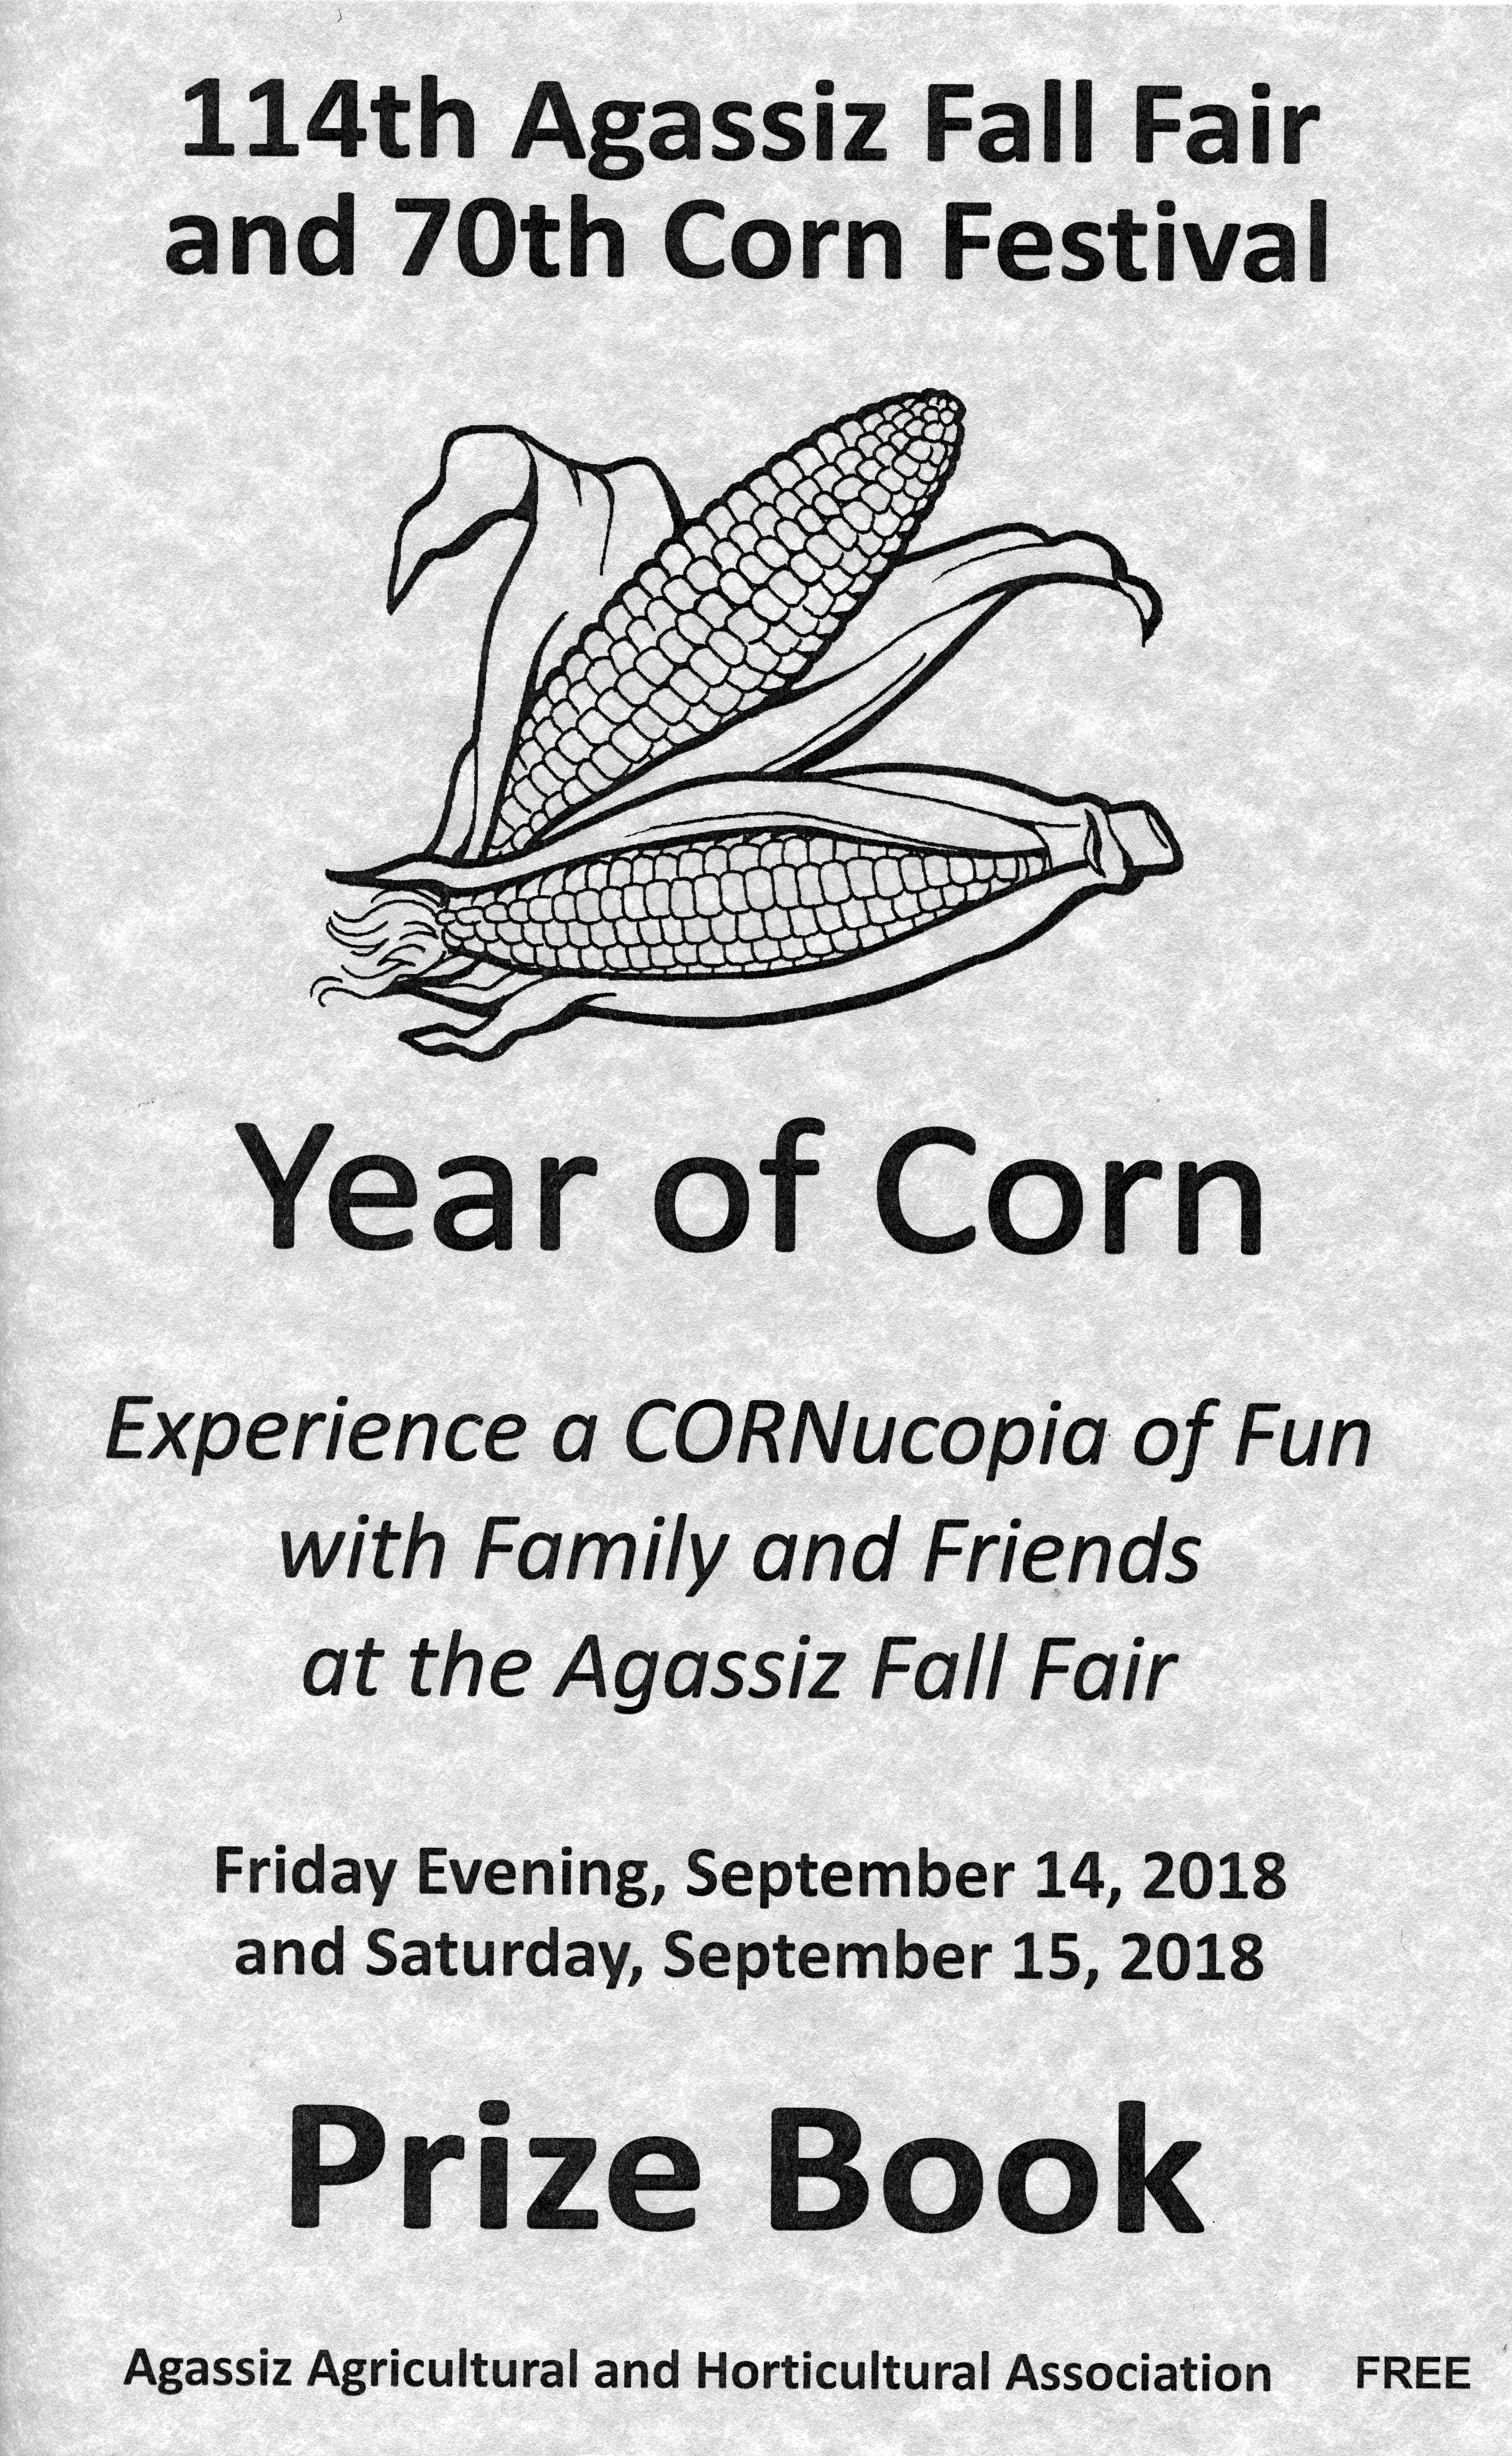 Black and white image of the prize book for the 114th Agassiz Fall Fair and 70th Corn Festival featuring a sketch of two corn cobs.